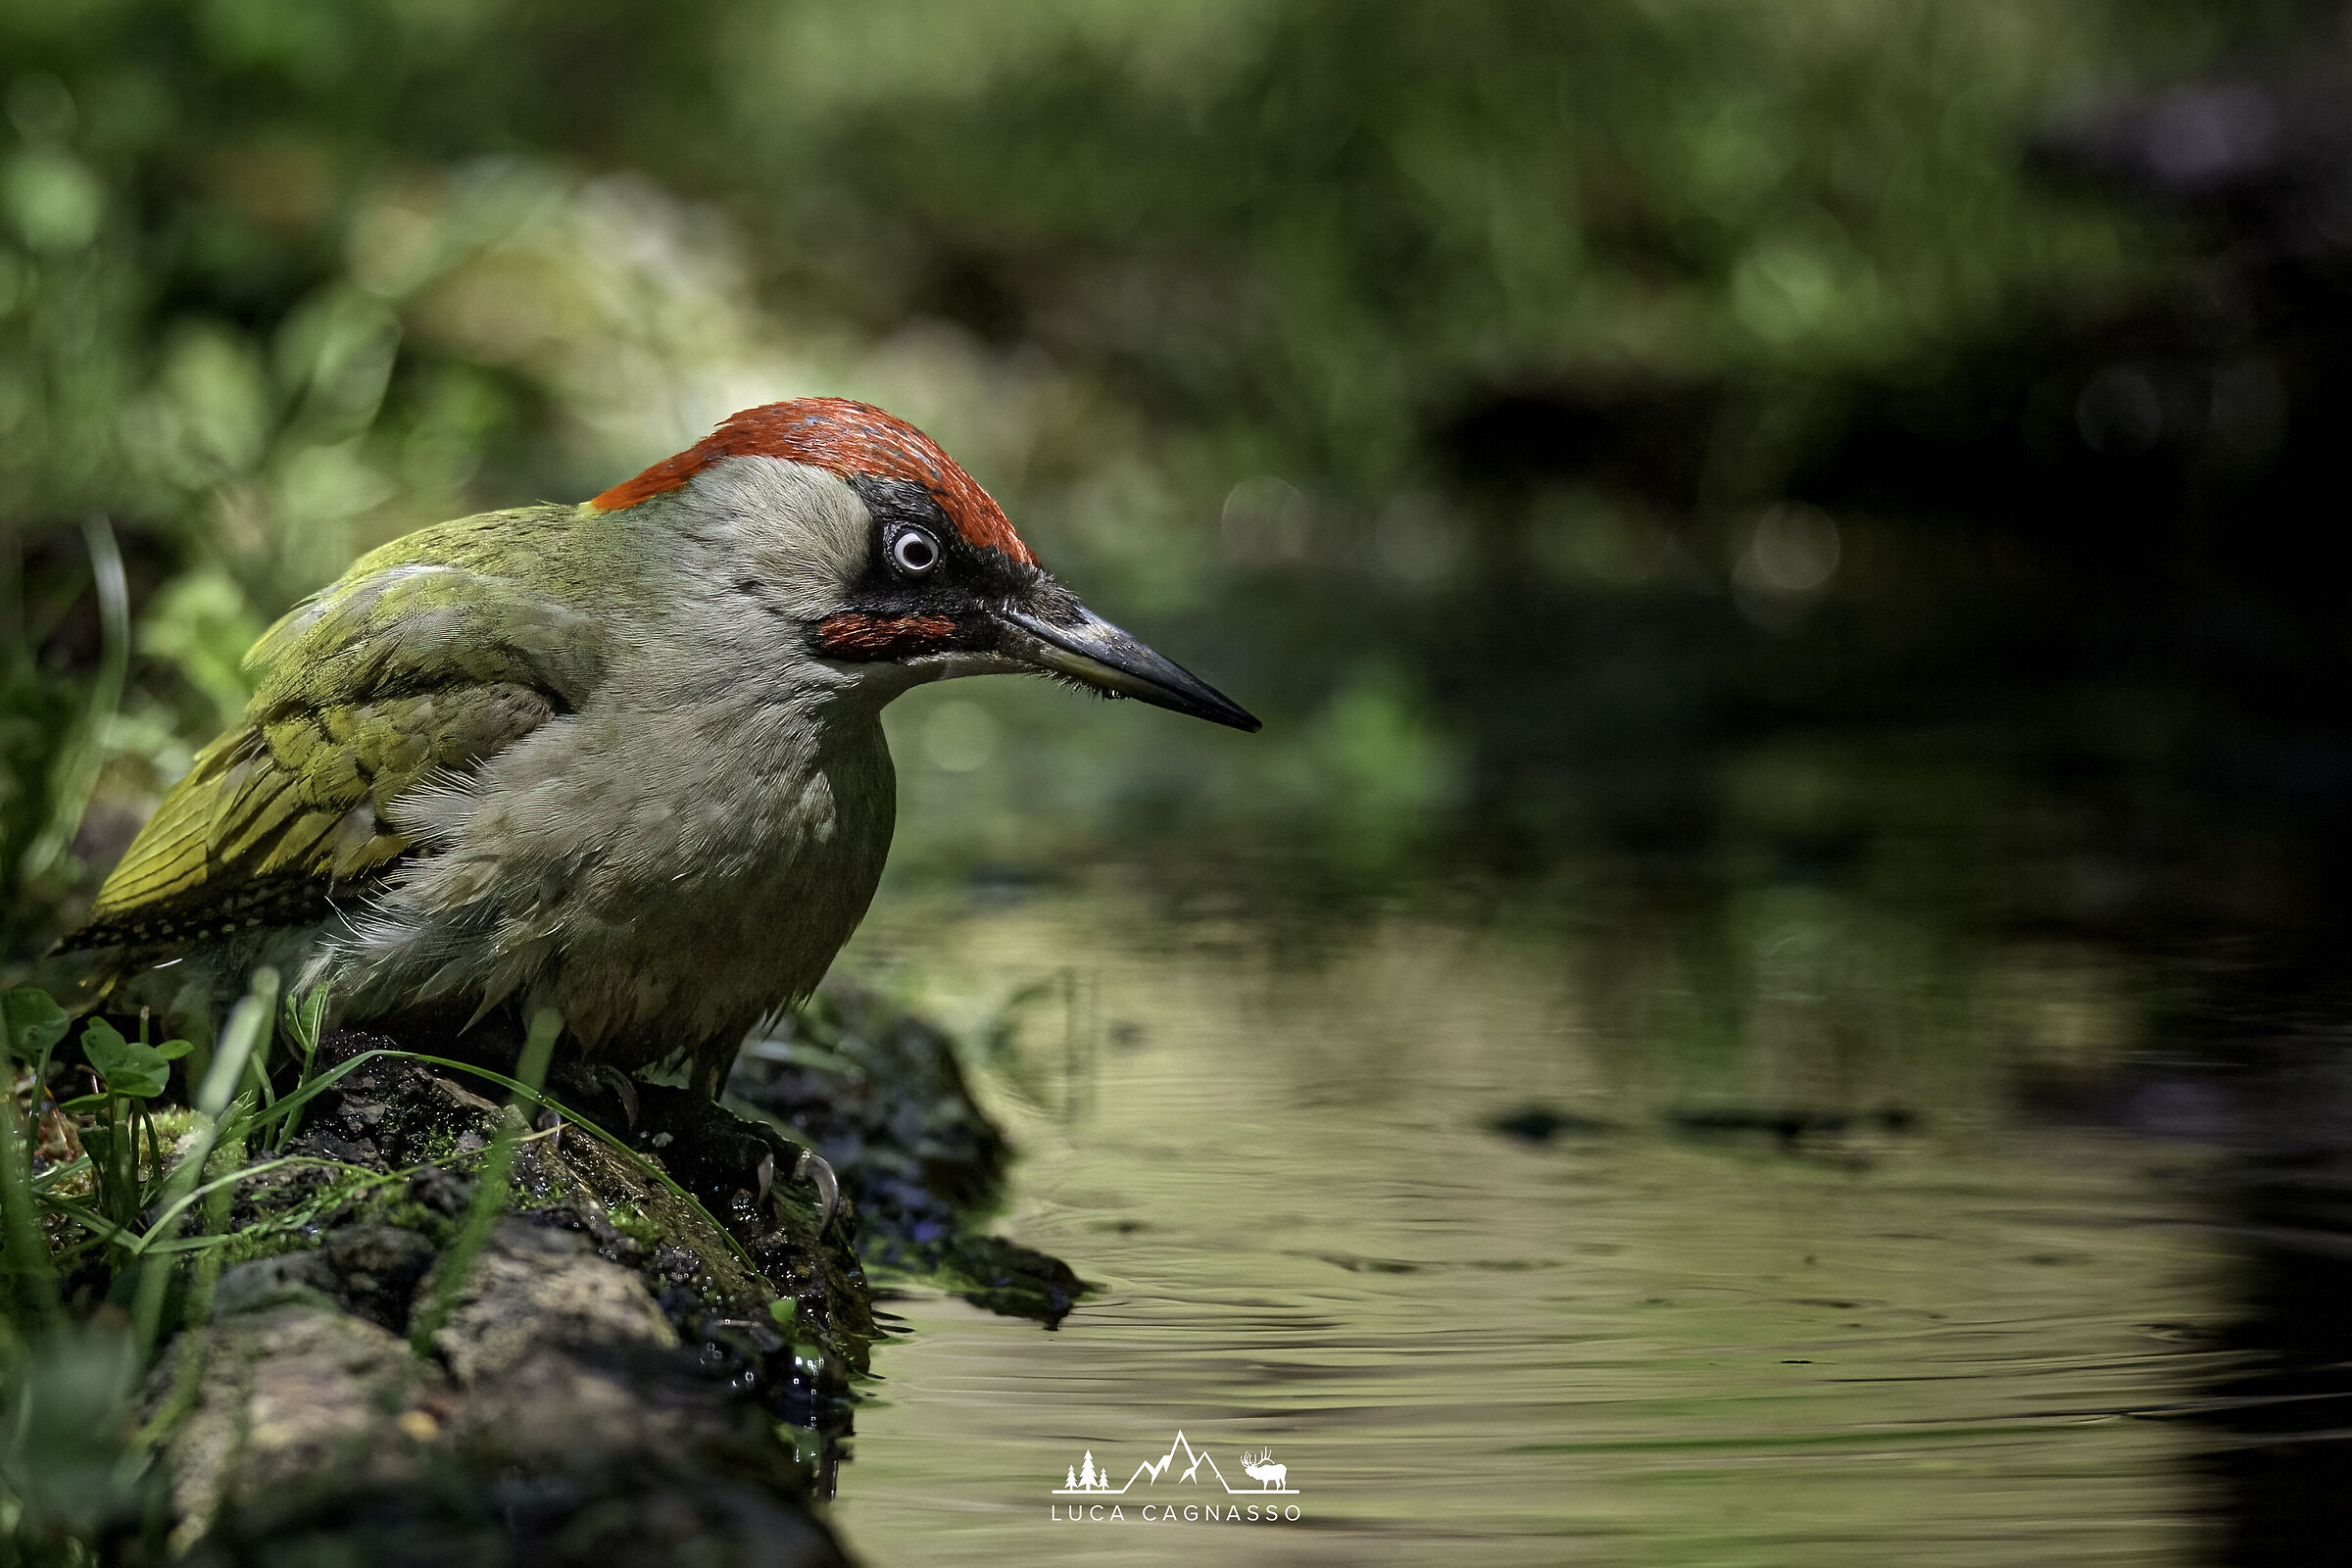 Green woodpecker with drinking...